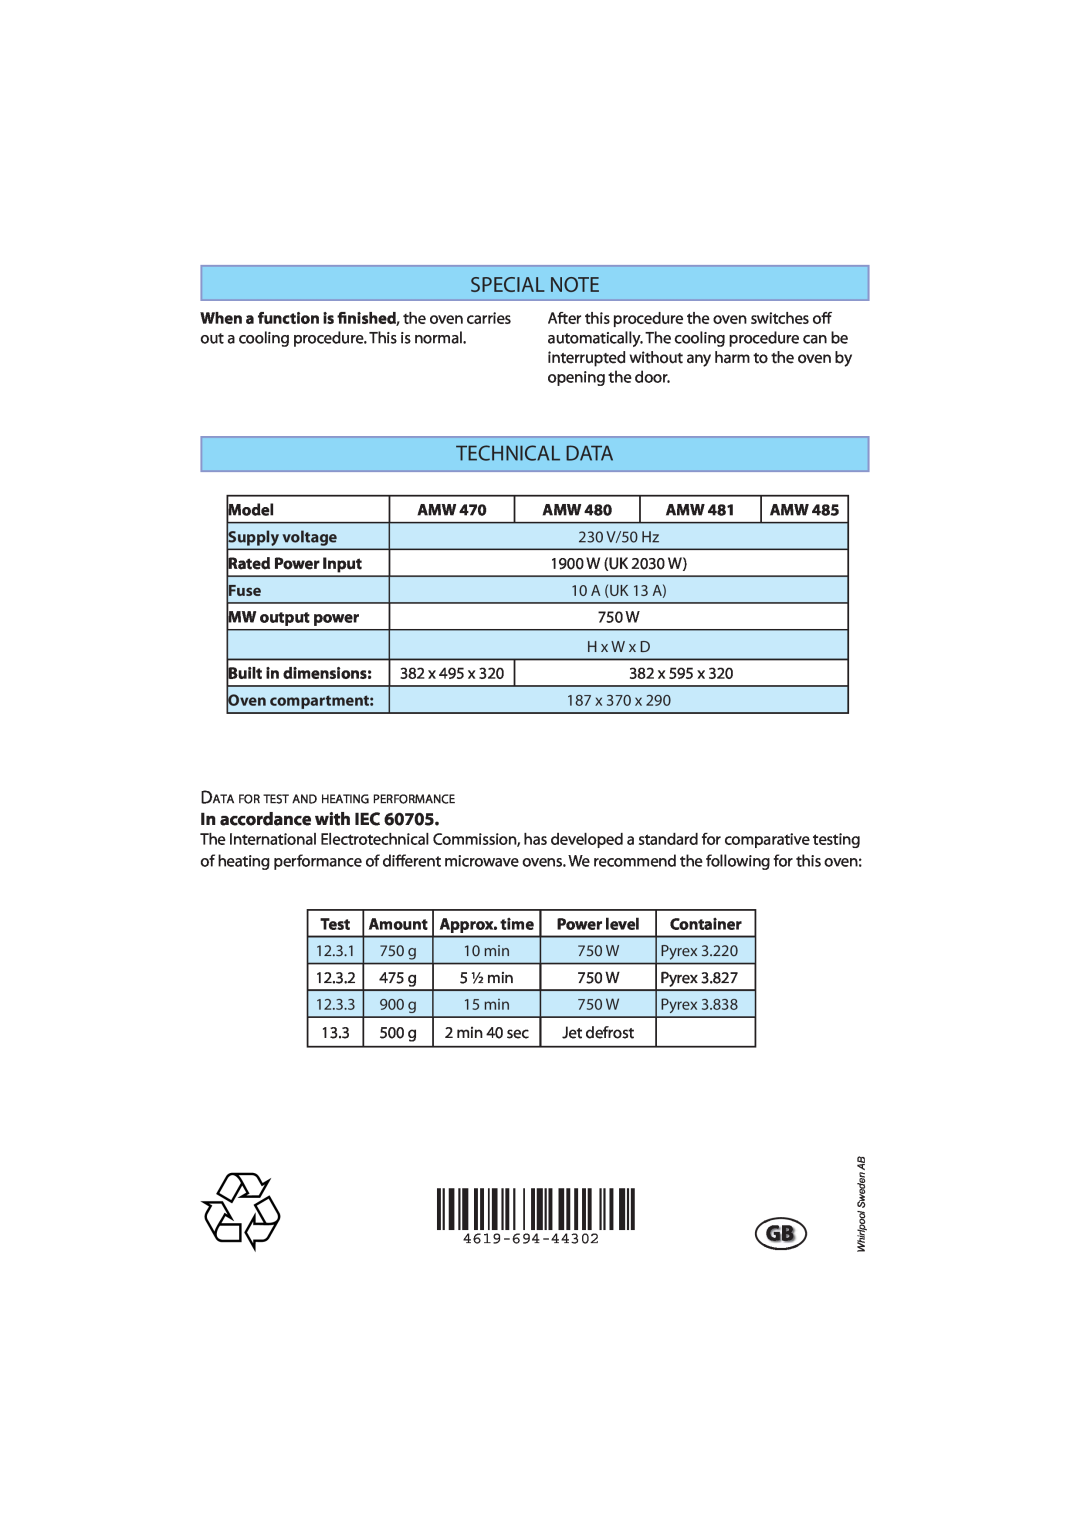 Whirlpool AMW 470, AMW 480, AMW 481, AMW 485 manual Special Note, Technical Data, In accordance with IEC 